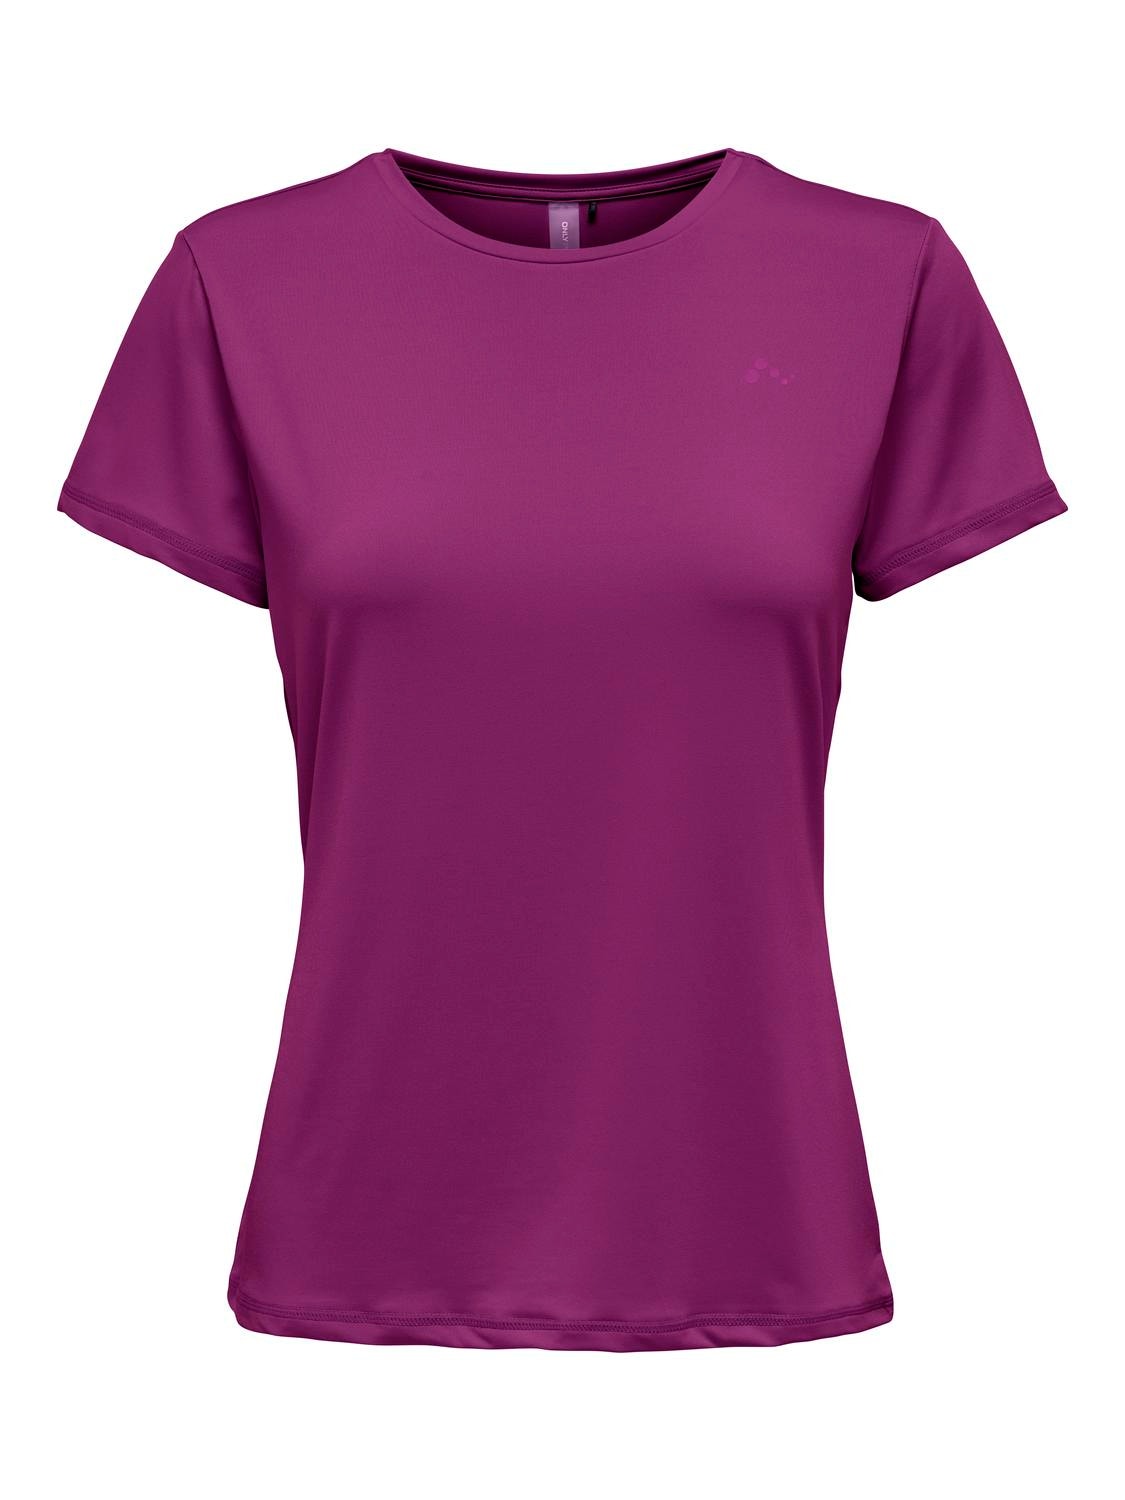 ONLY Solid color training top -Clover - 15281098